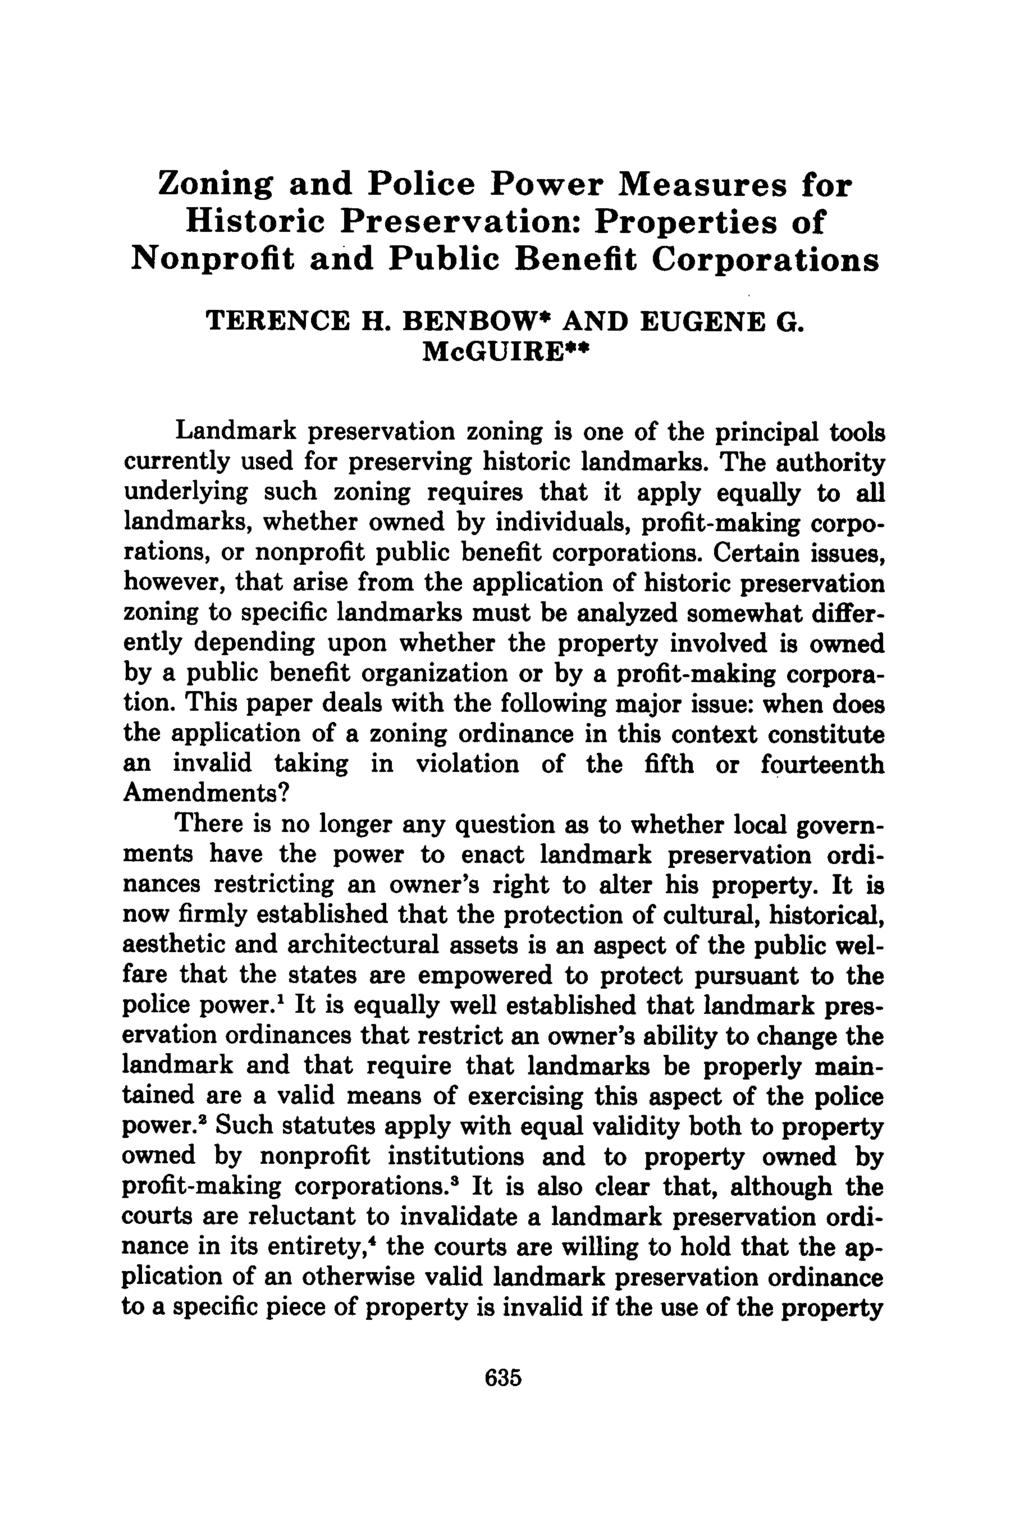 Zoning and Police Power Measures for Historic Preservation: Properties of Nonprofit and Public Benefit Corporations TERENCE H. BENBOW* AND EUGENE G.